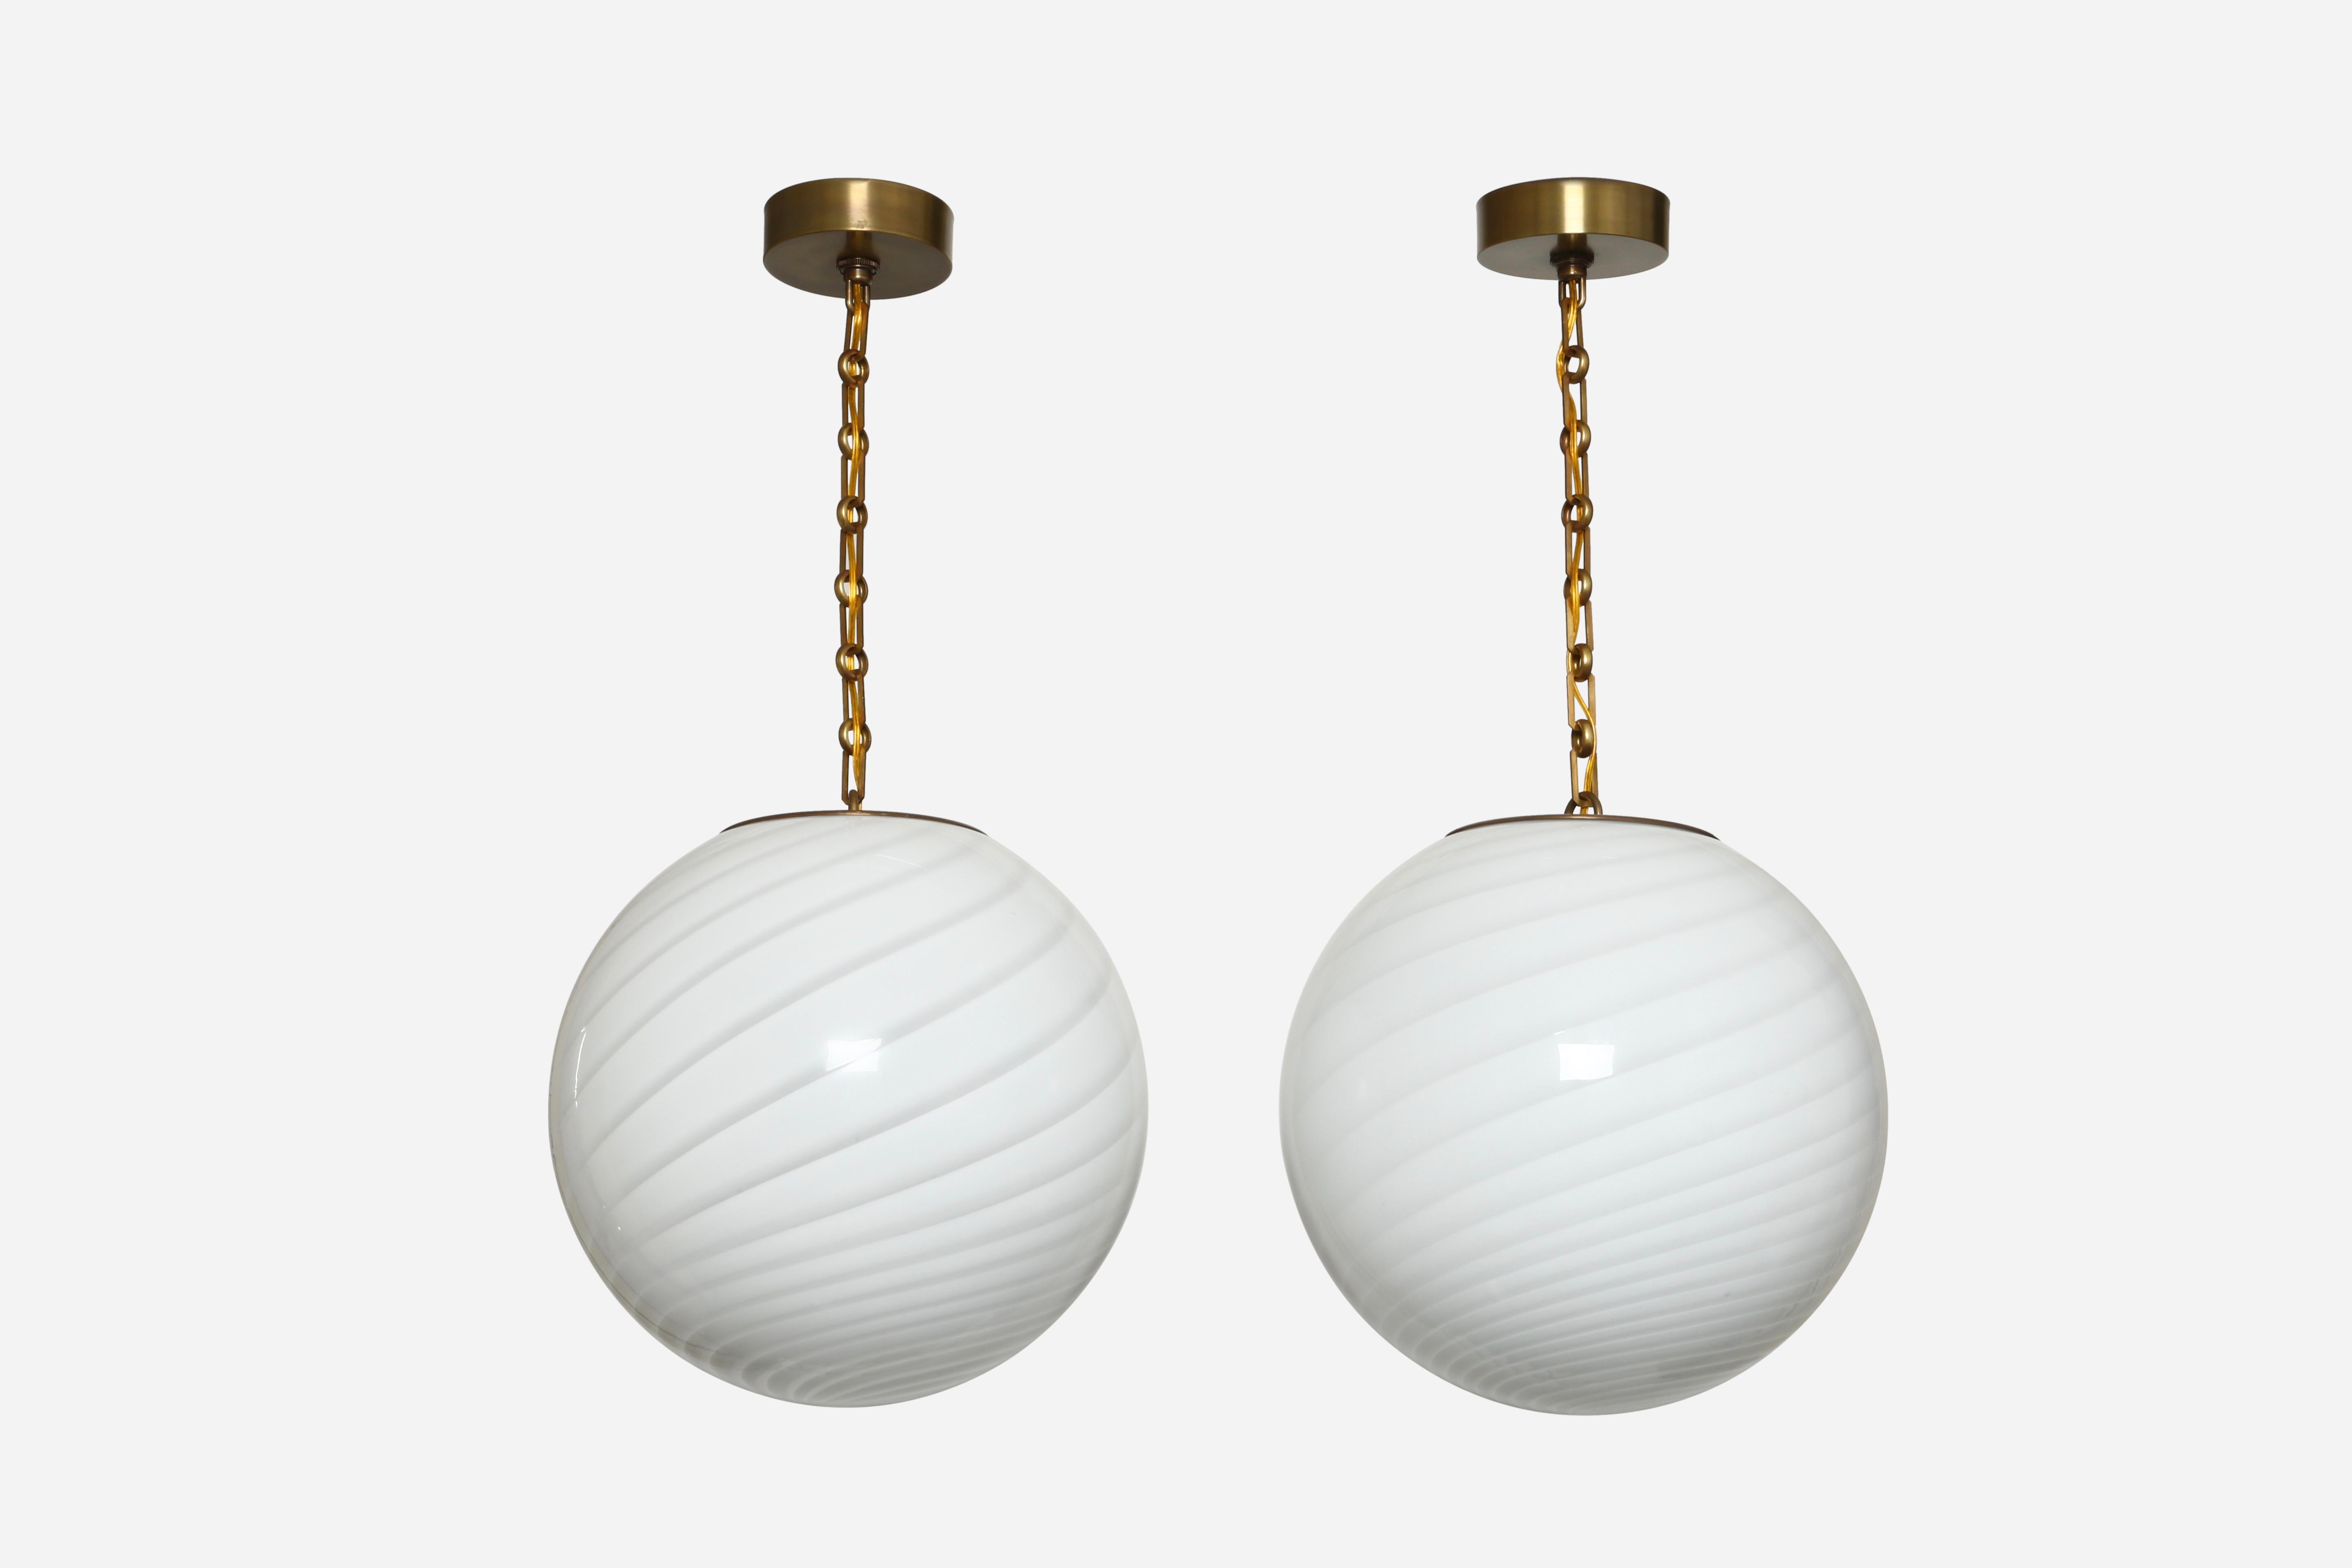 Murano glass ceiling pendants.
Made for us exclusively in Italy.
Hand blown glass, custom finished metal.
Available in brass or patinated brass.
Italy 2021
Rewired for US
Overall drop is adjustable. Chain can be made shorter or longer.
Priced per